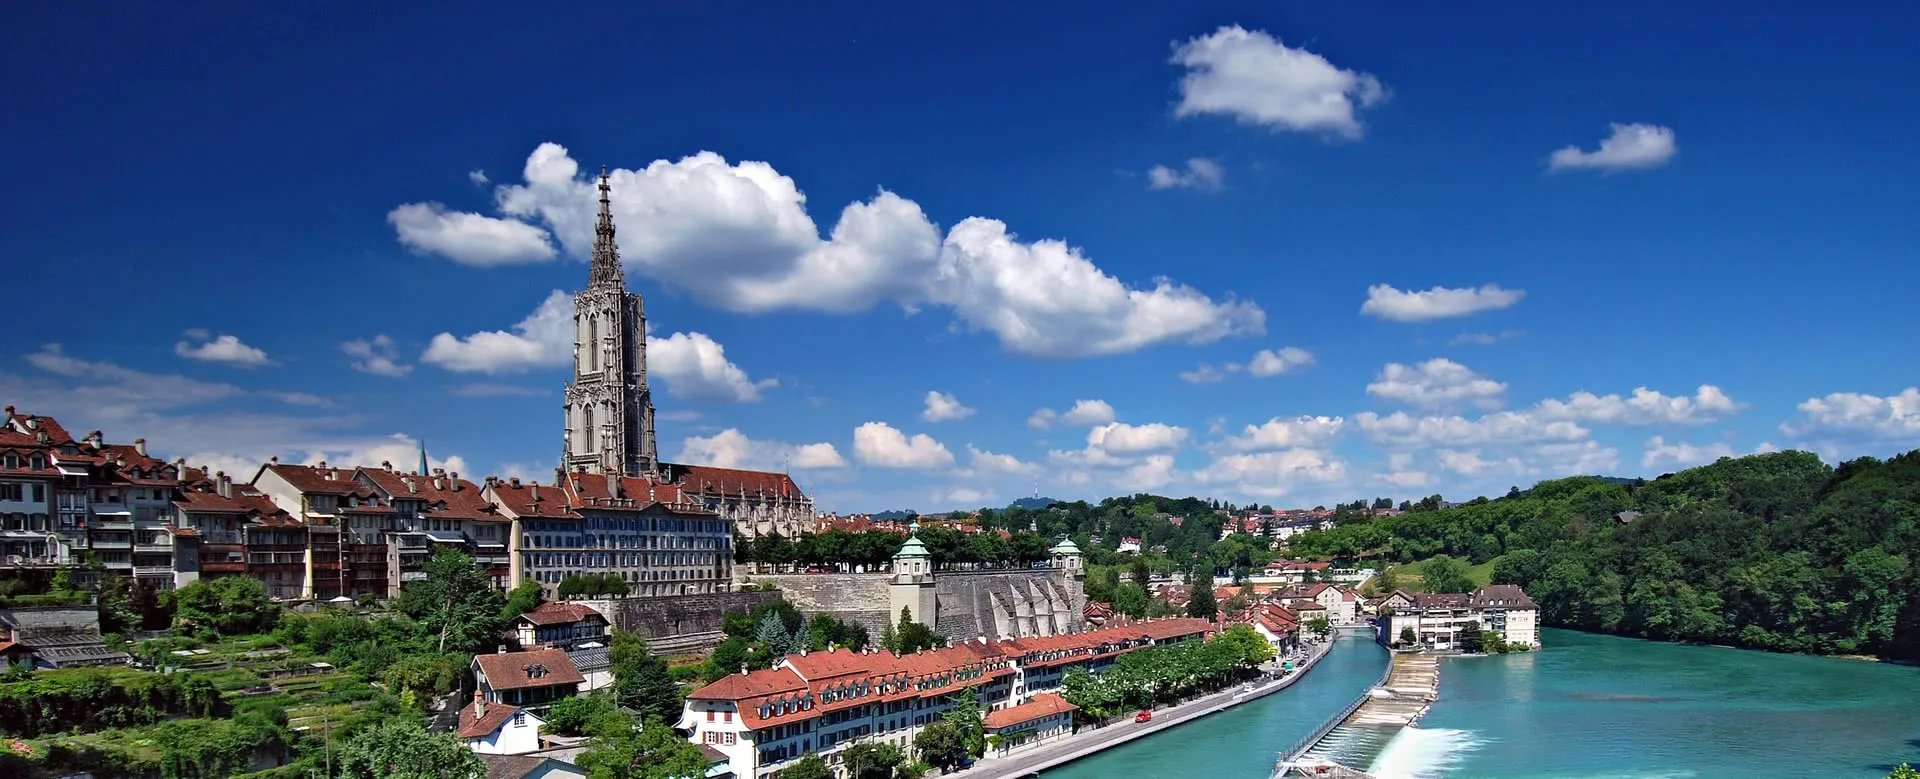 Bern - the destination with youth hostels